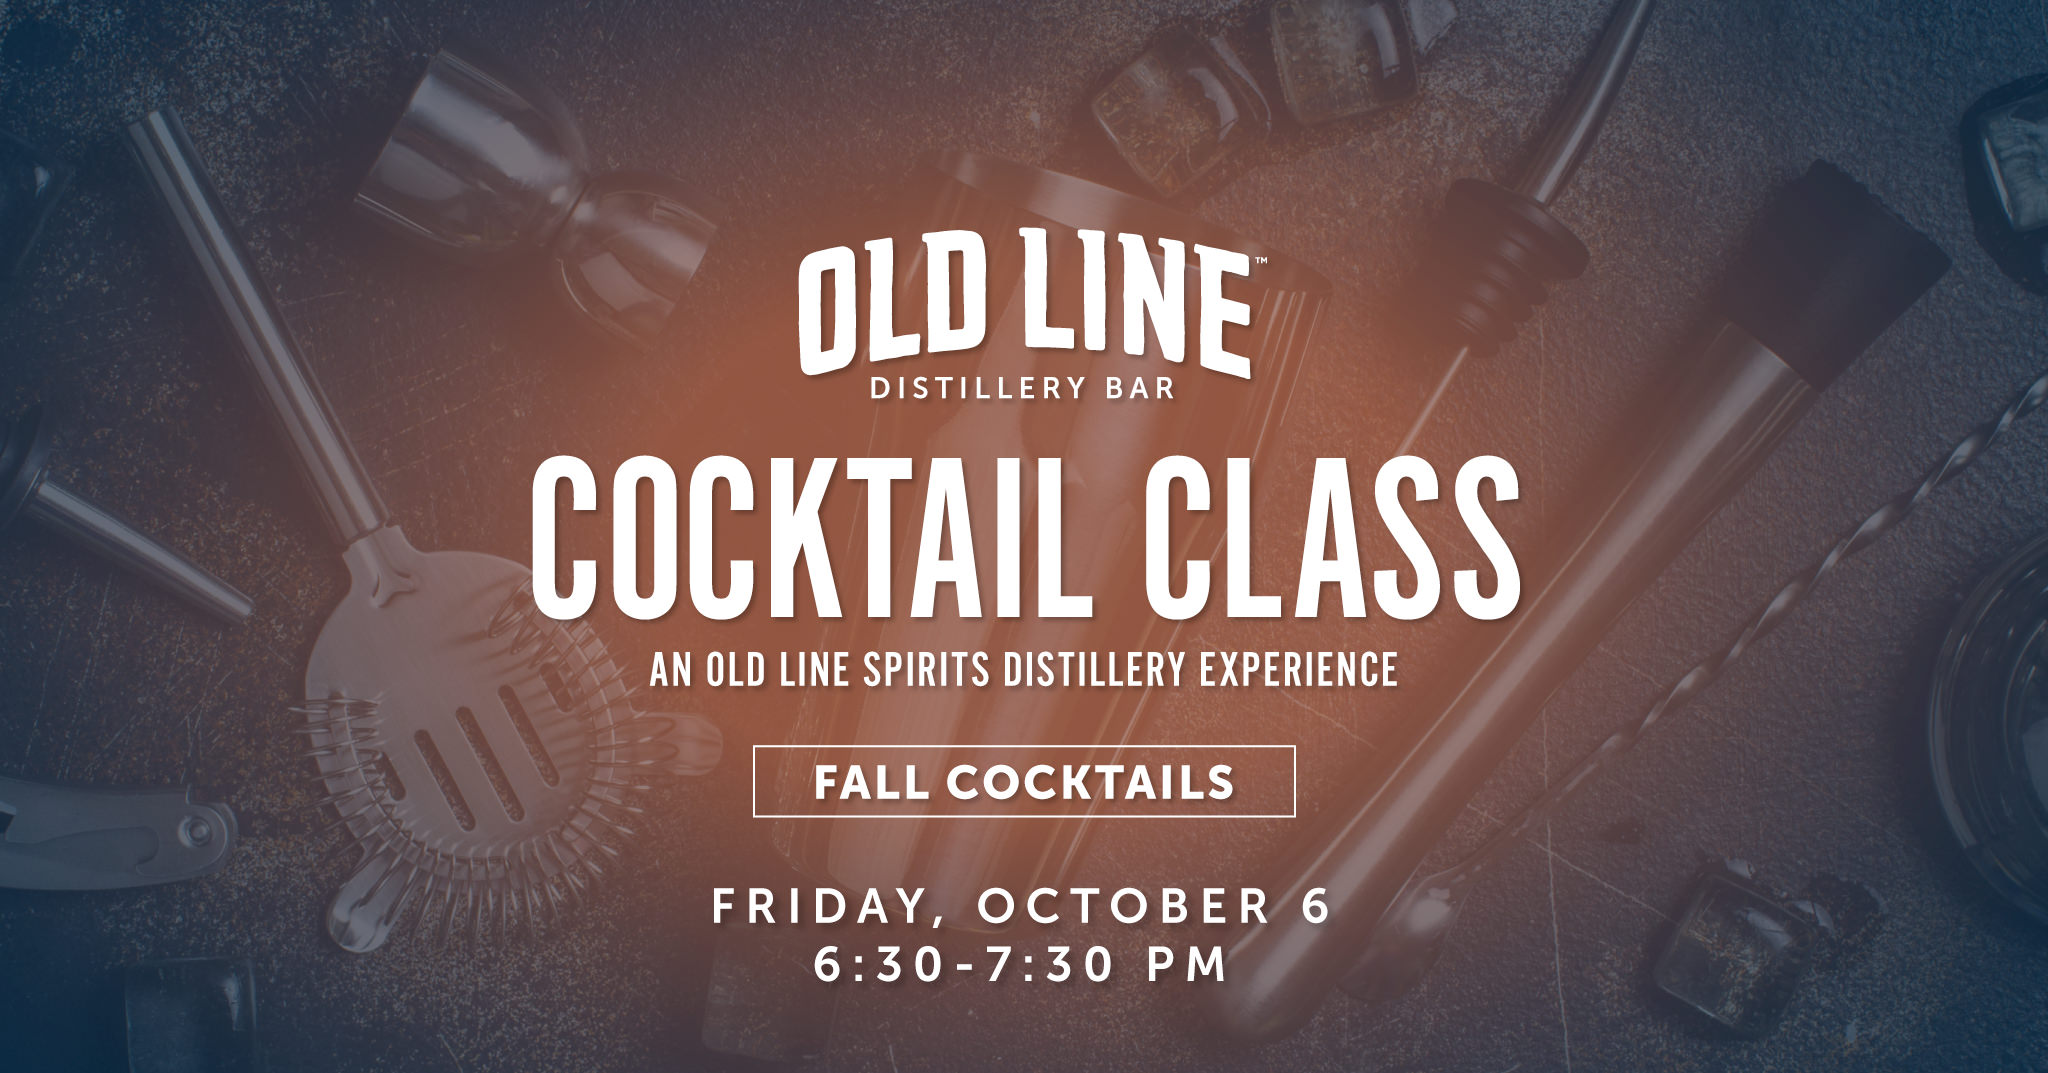 Old Line Cocktail Class Fall Cocktails